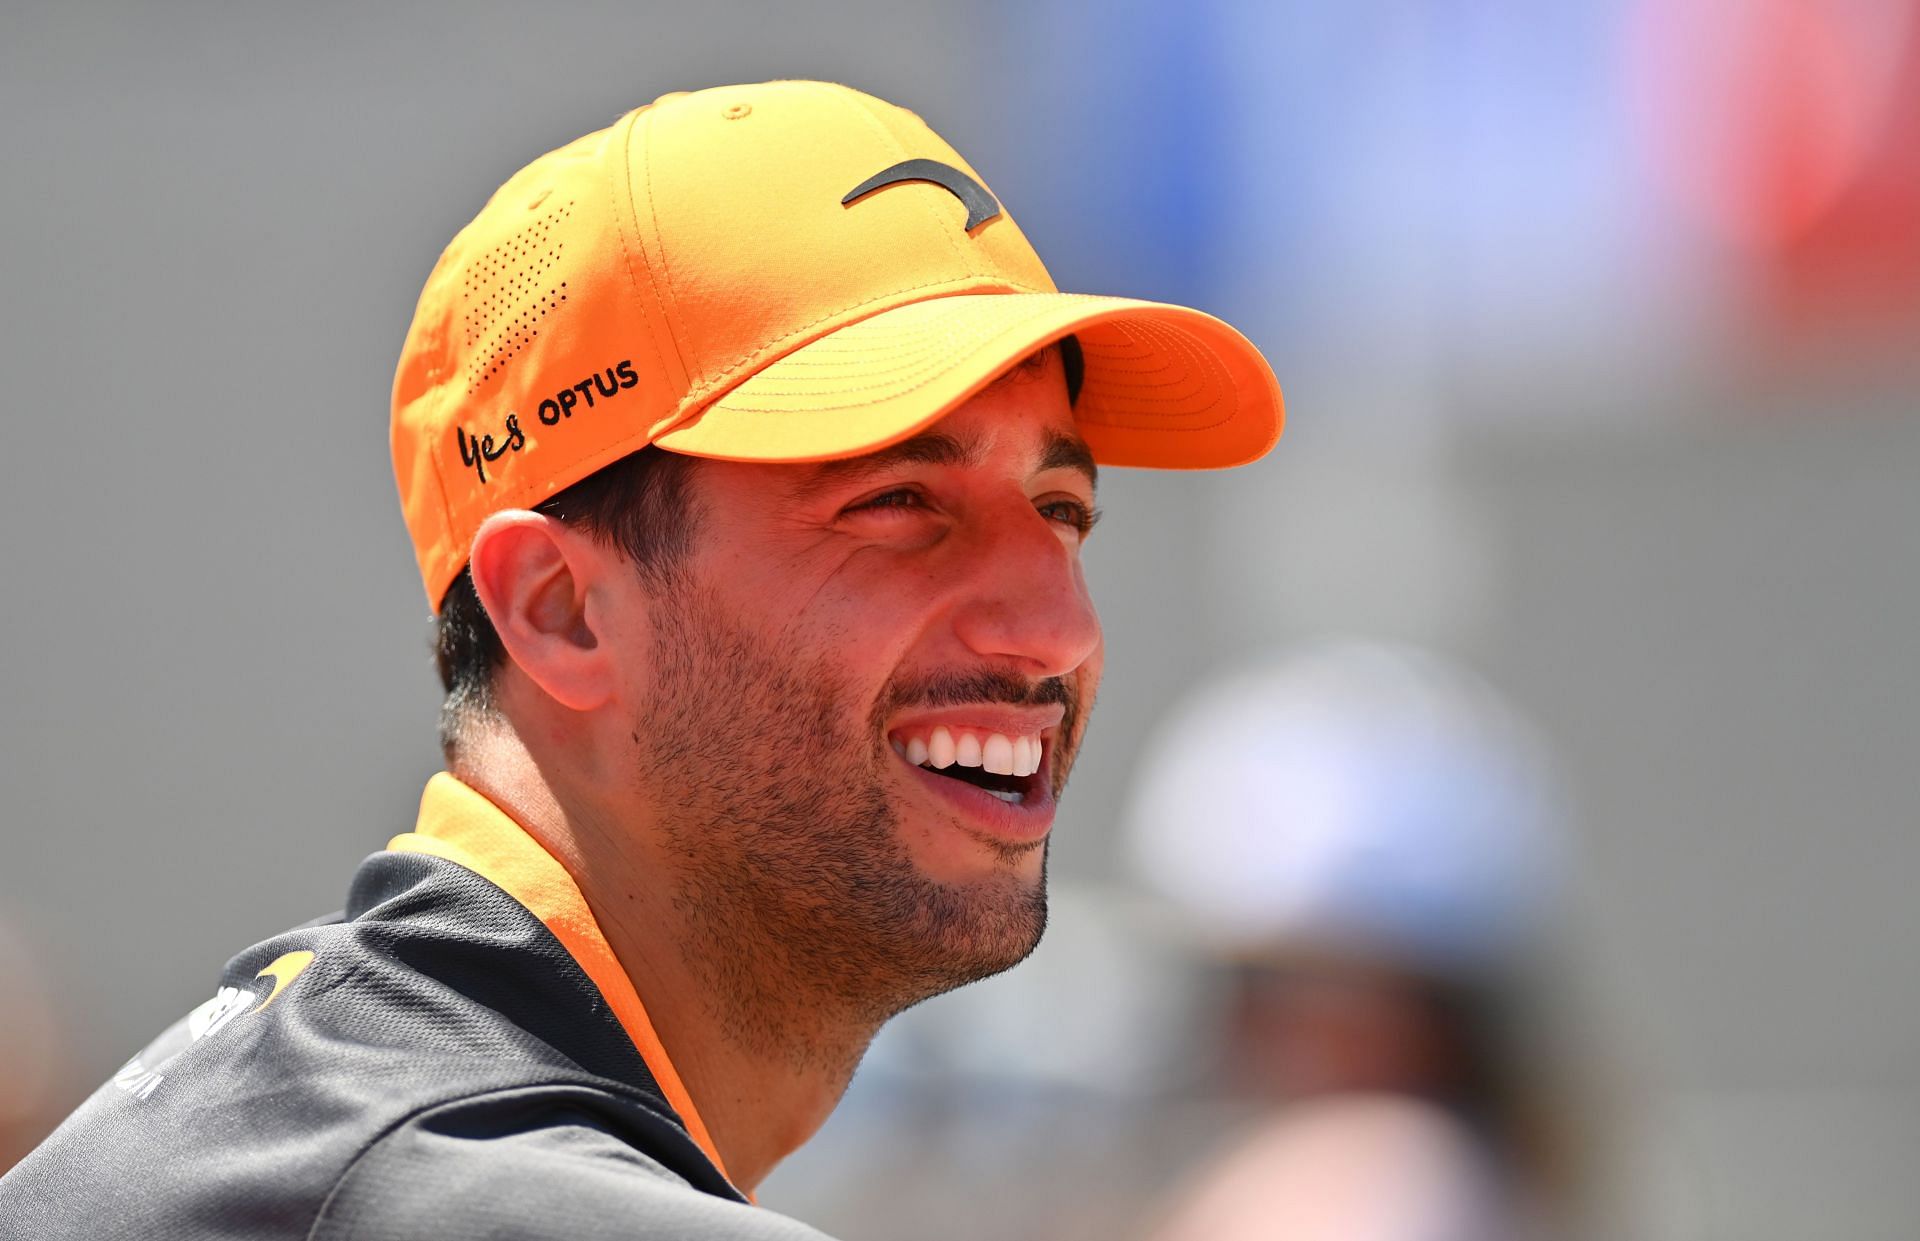 Daniel Ricciardo at the F1 Grand Prix of France at Circuit Paul Ricard on July 24, 2022 in Le Castellet, France. (Photo by Dan Mullan/Getty Images)